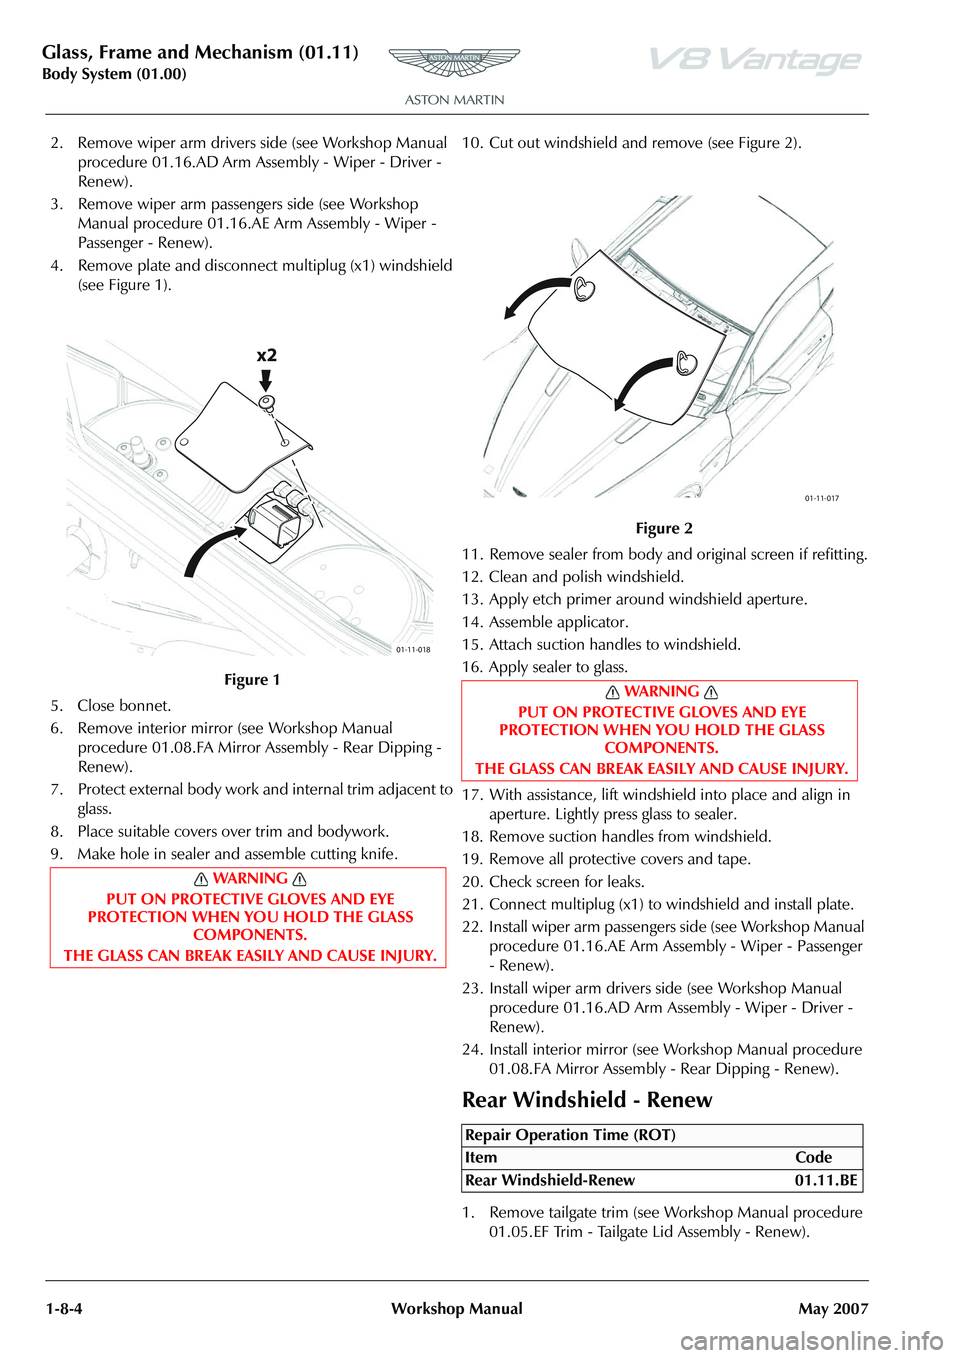 ASTON MARTIN V8 VANTAGE 2010  Workshop Manual Glass, Frame and Mechanism (01.11)
Body System (01.00)1-8-4 Workshop Manual May 2007
2. Remove wiper arm drivers side (see Workshop Manual  procedure 01.16.AD Arm Asse mbly - Wiper - Driver - 
Renew).